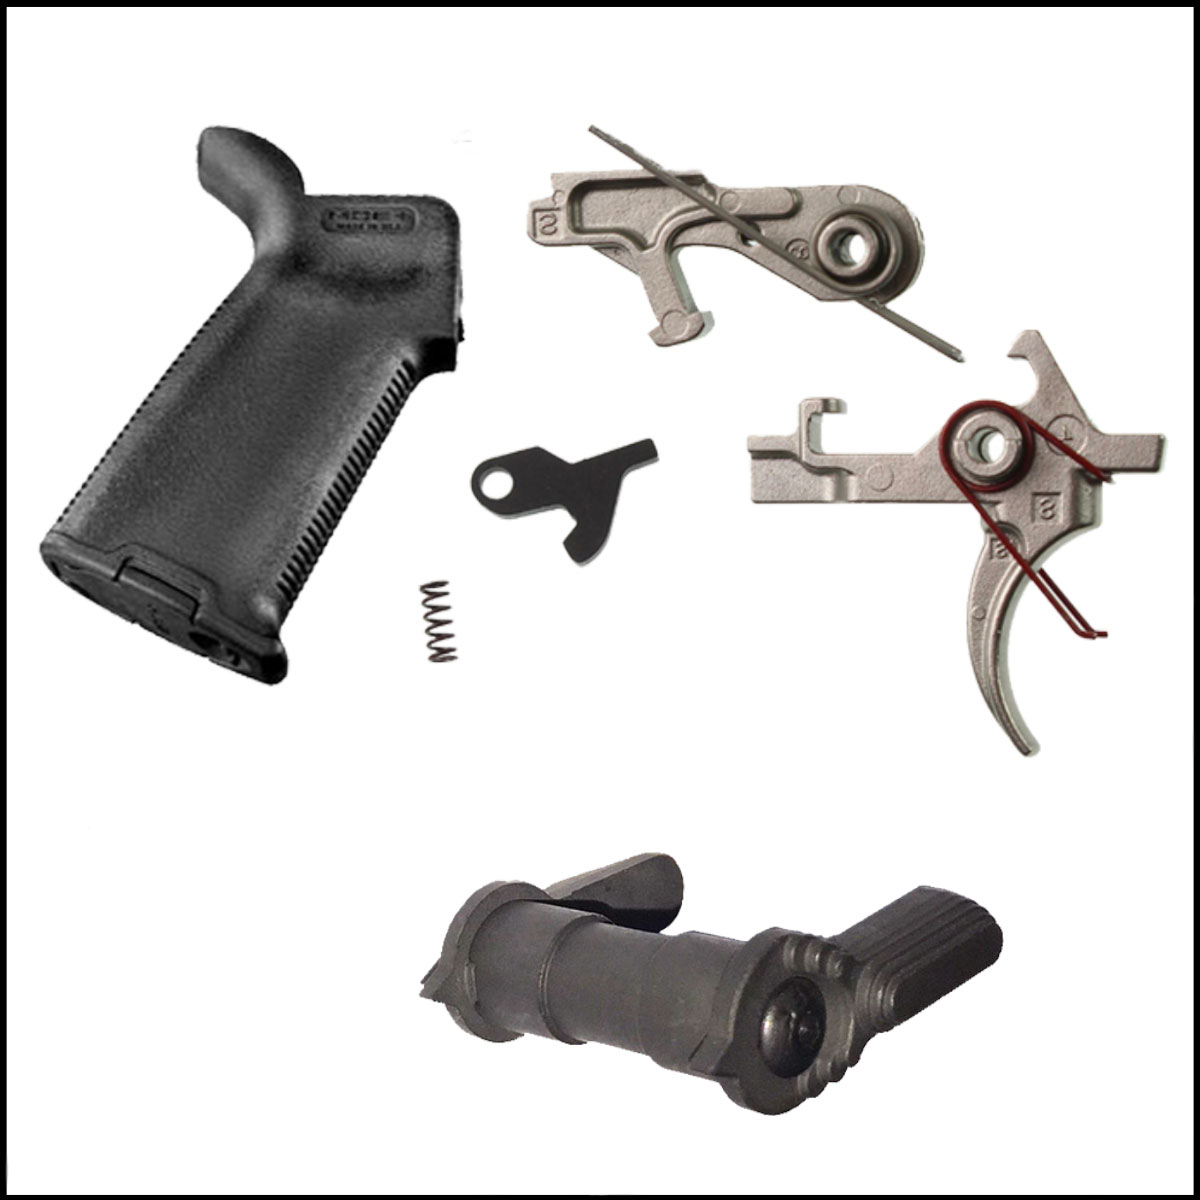 Lower Upgrade Kit: Recoil Technologies Top Shelf 2 Stage Trigger  + Anderson Mfg Ambi Safety Selector  + Magpul MOE Plus Pistol Grip AR-15 Enhanced Grip